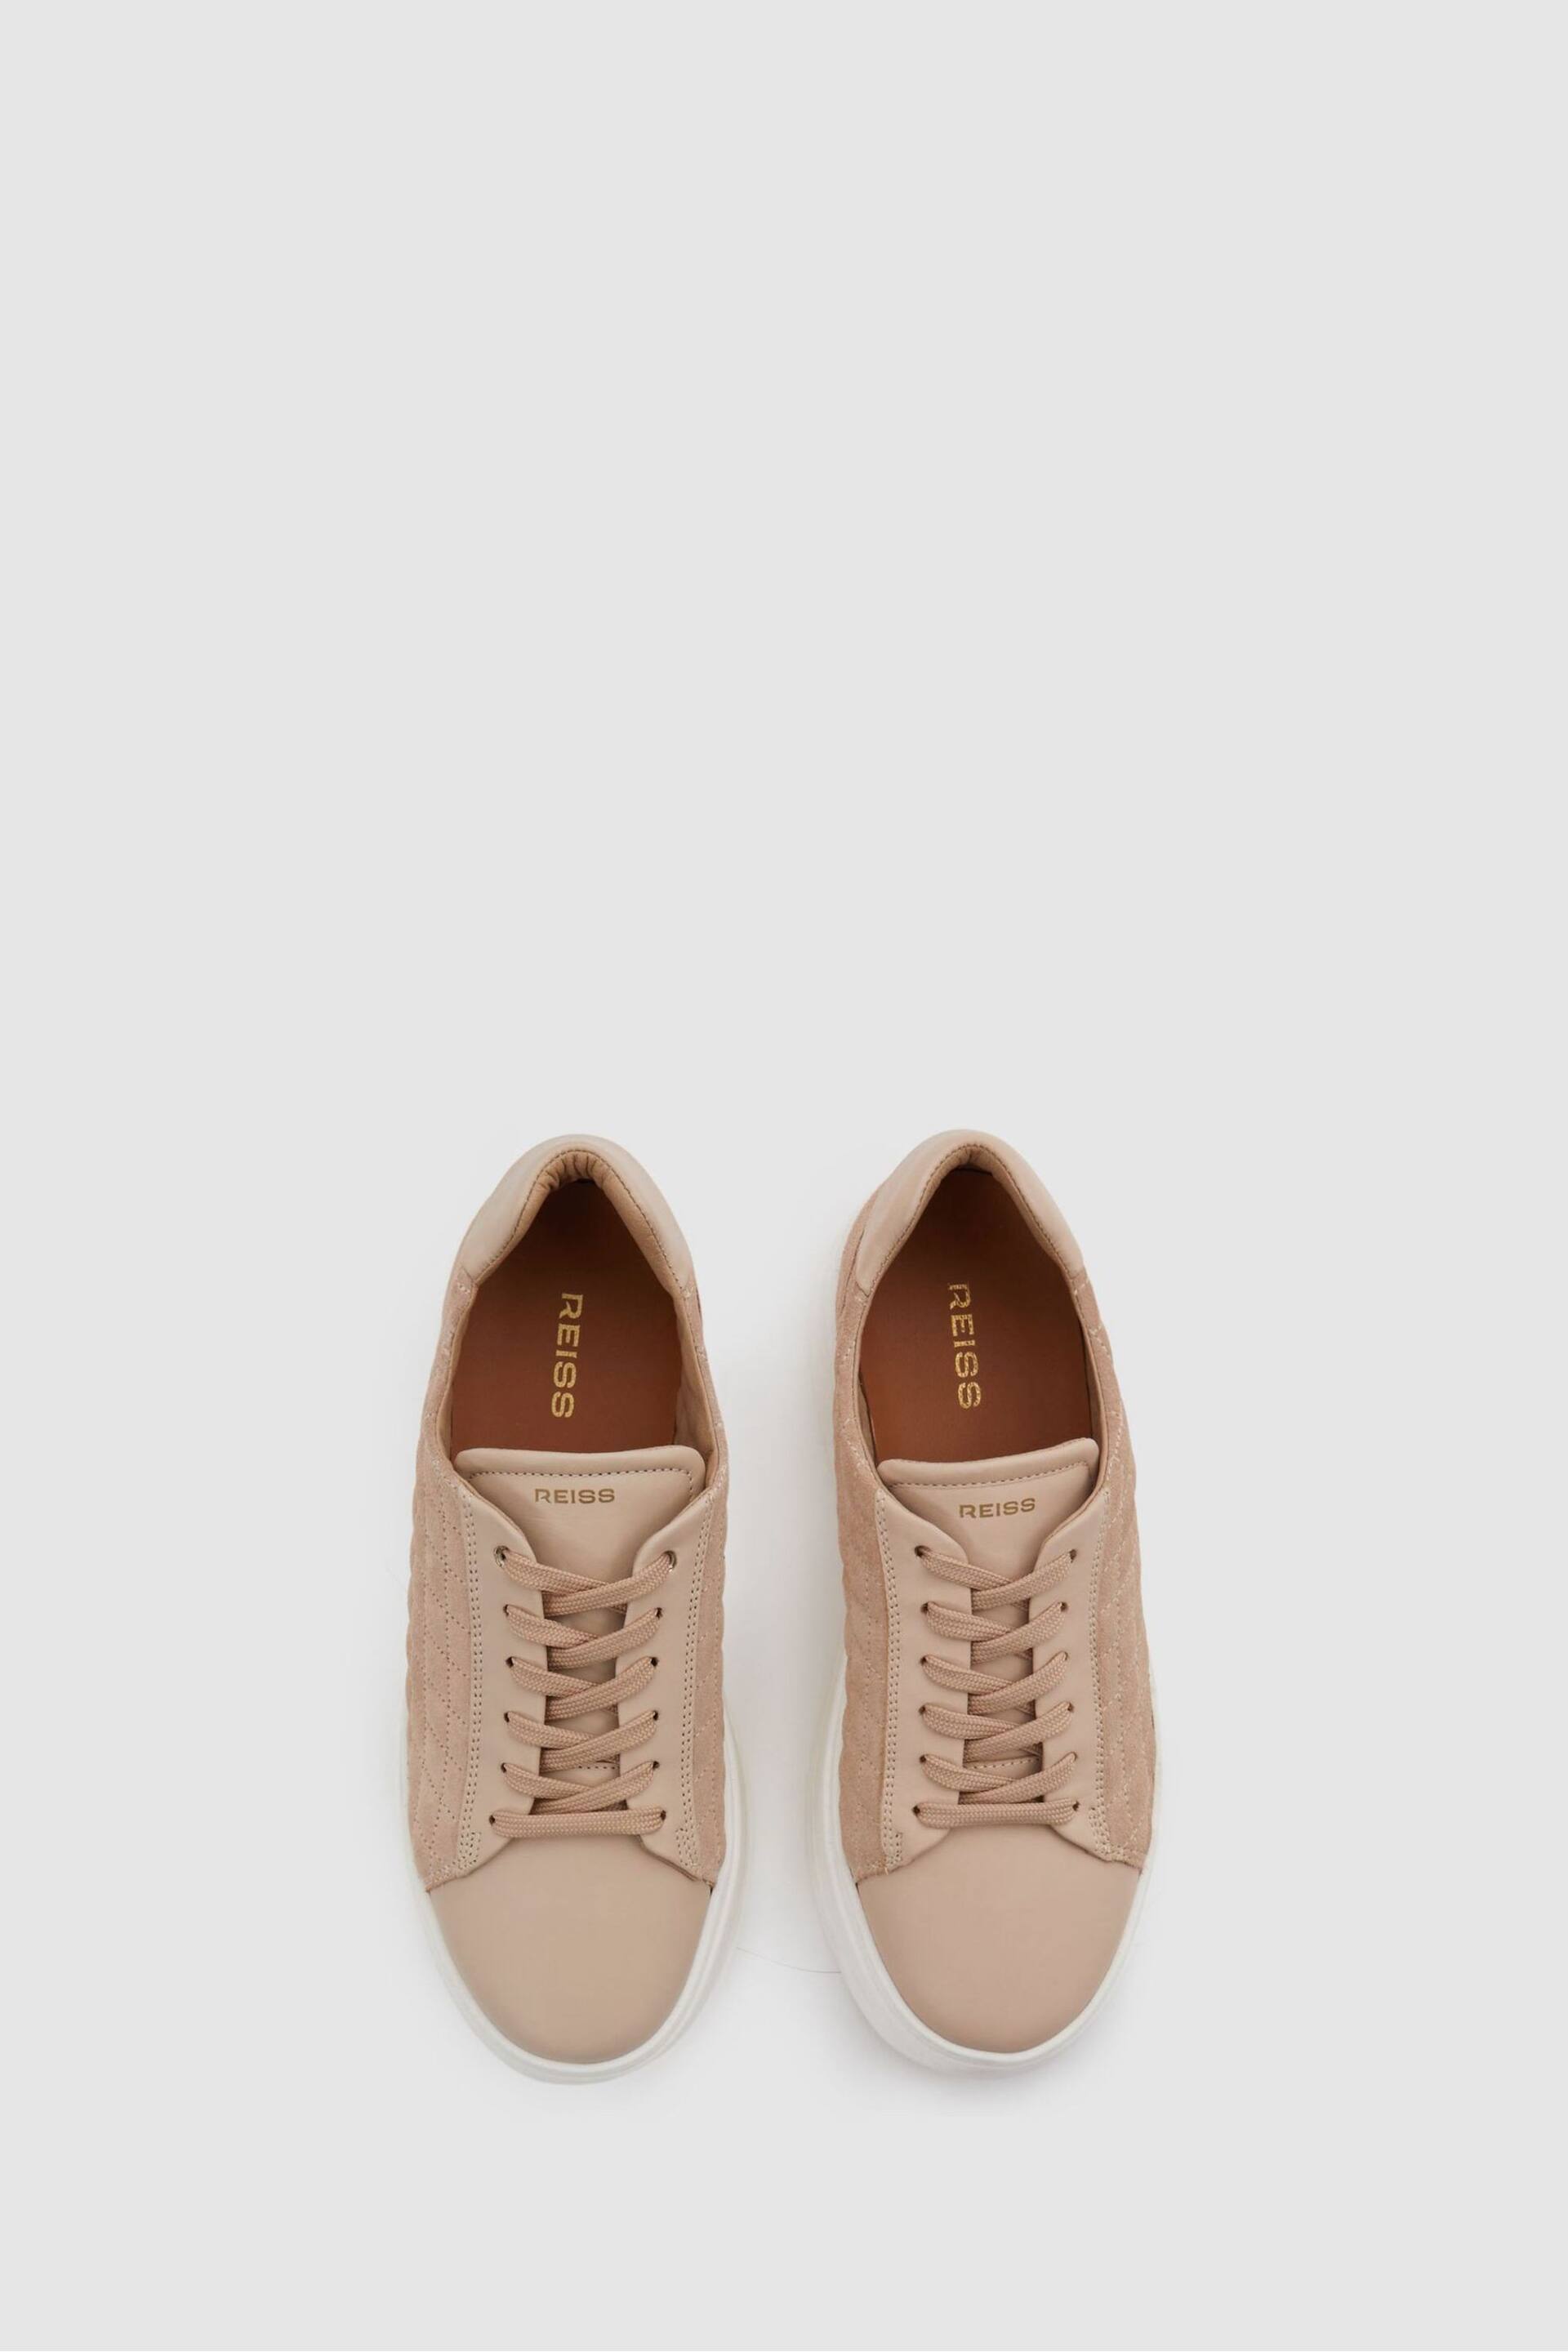 Reiss Blush Cassidy Leather Suede Lattice Trainers - Image 3 of 5